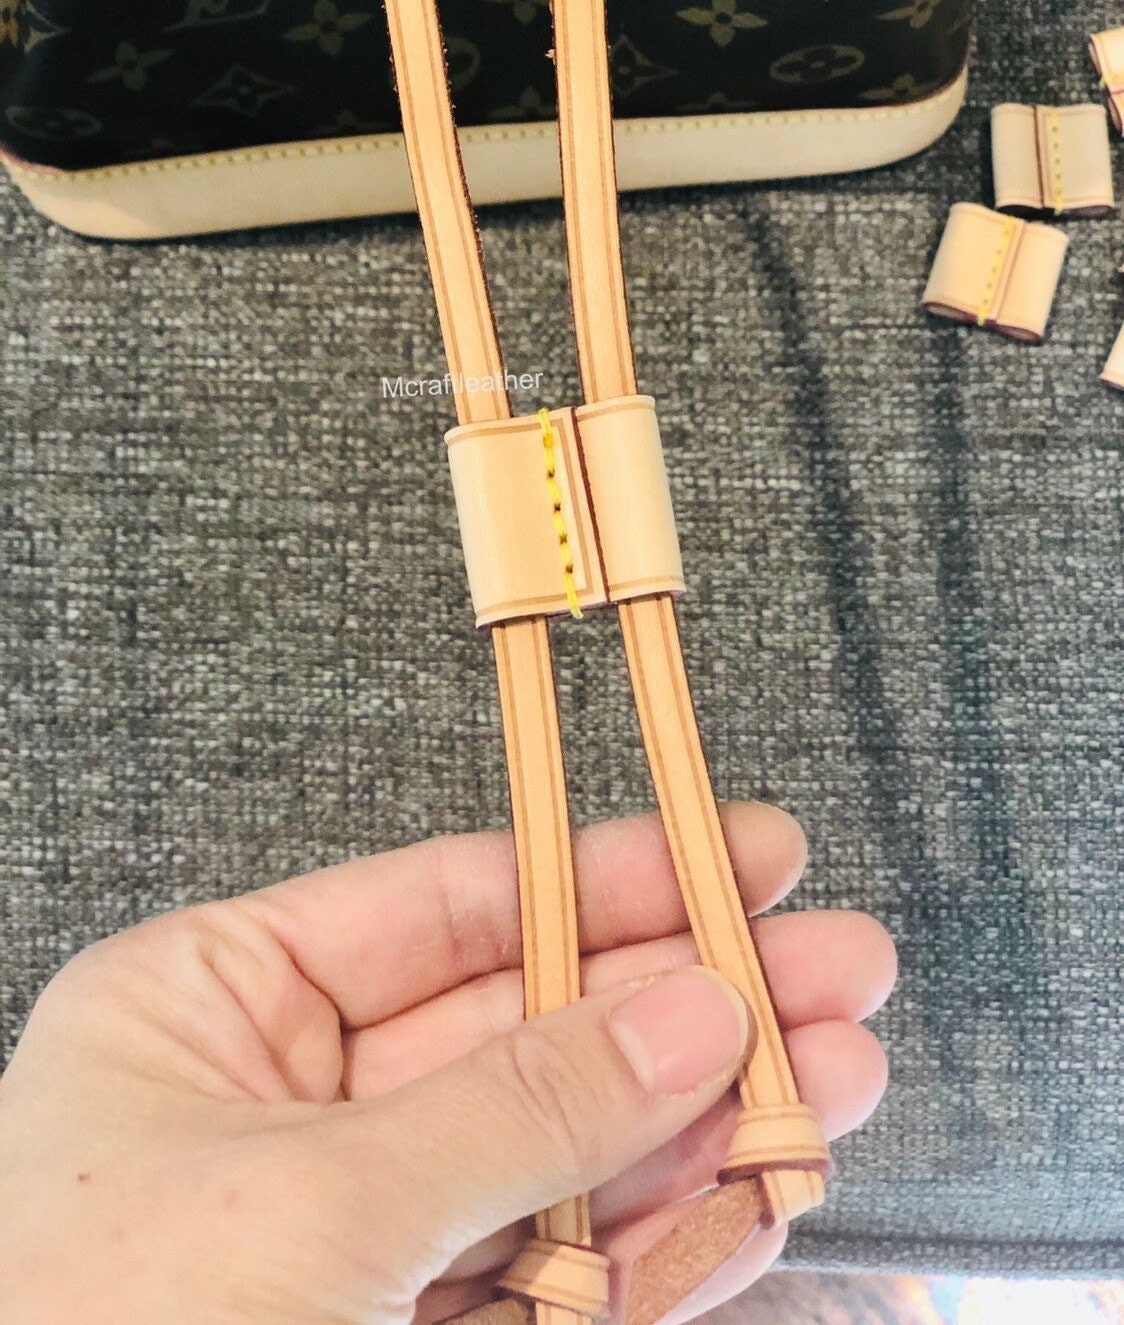 I bought a string slider for my Petit Noe and it made life so much